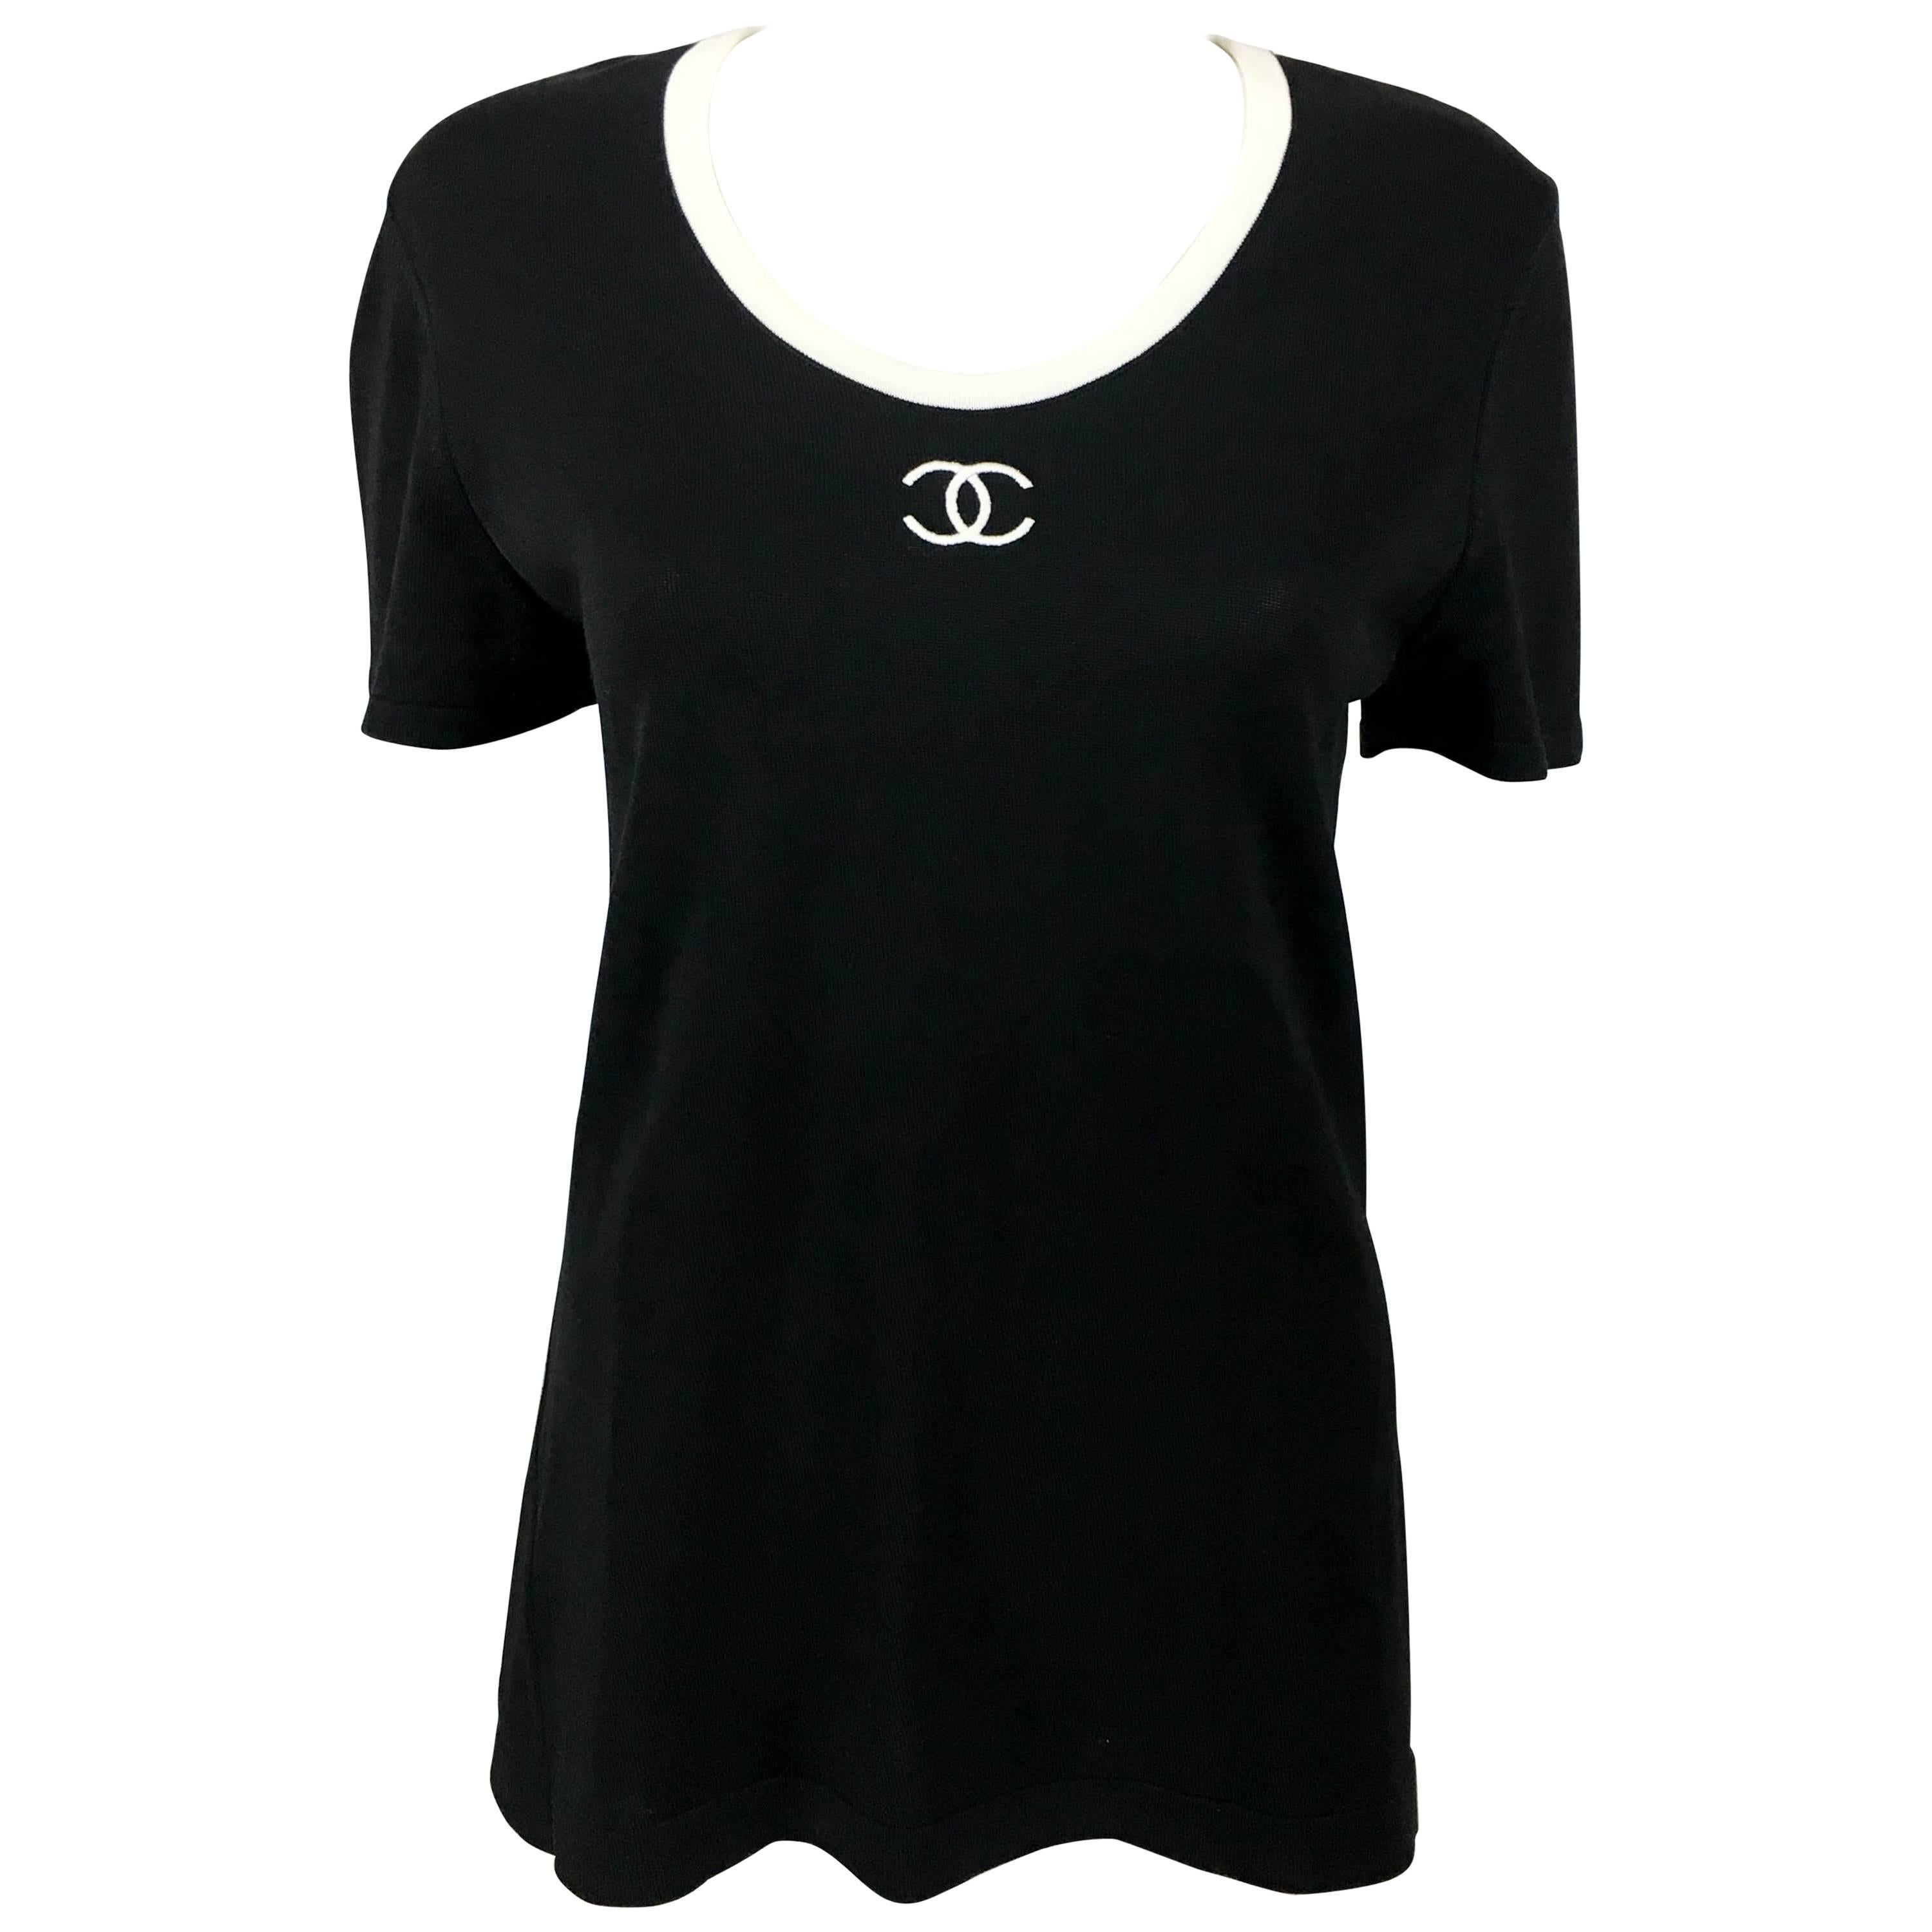 1990s Chanel Black Cotton Jersey T-Shirt With White Logo